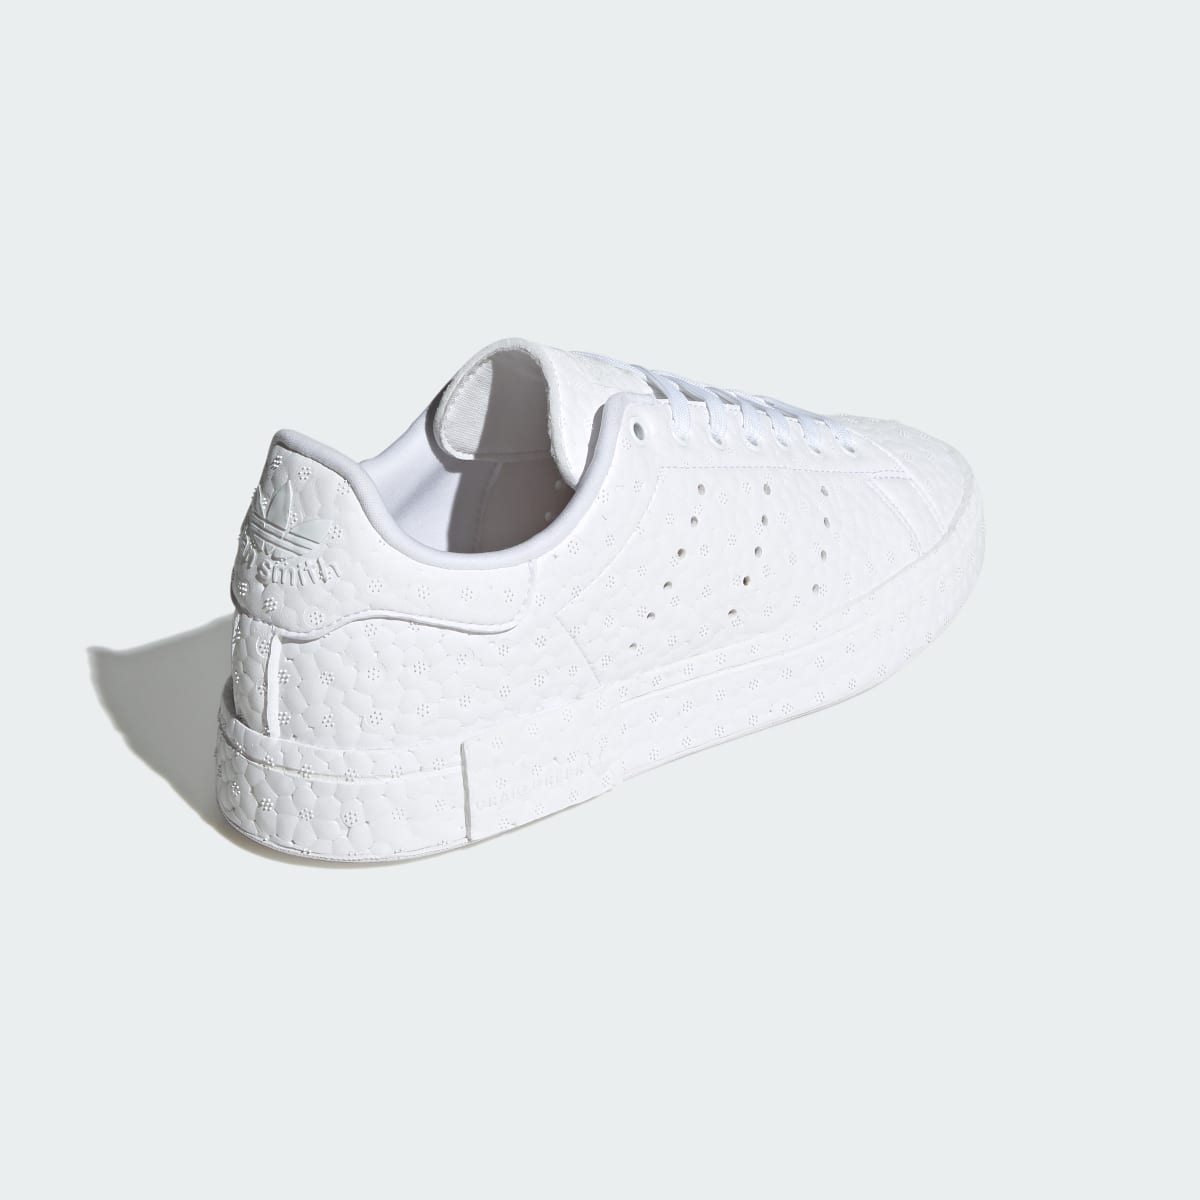 Adidas Craig Green Stan Smith BOOST Low Trainers. 6